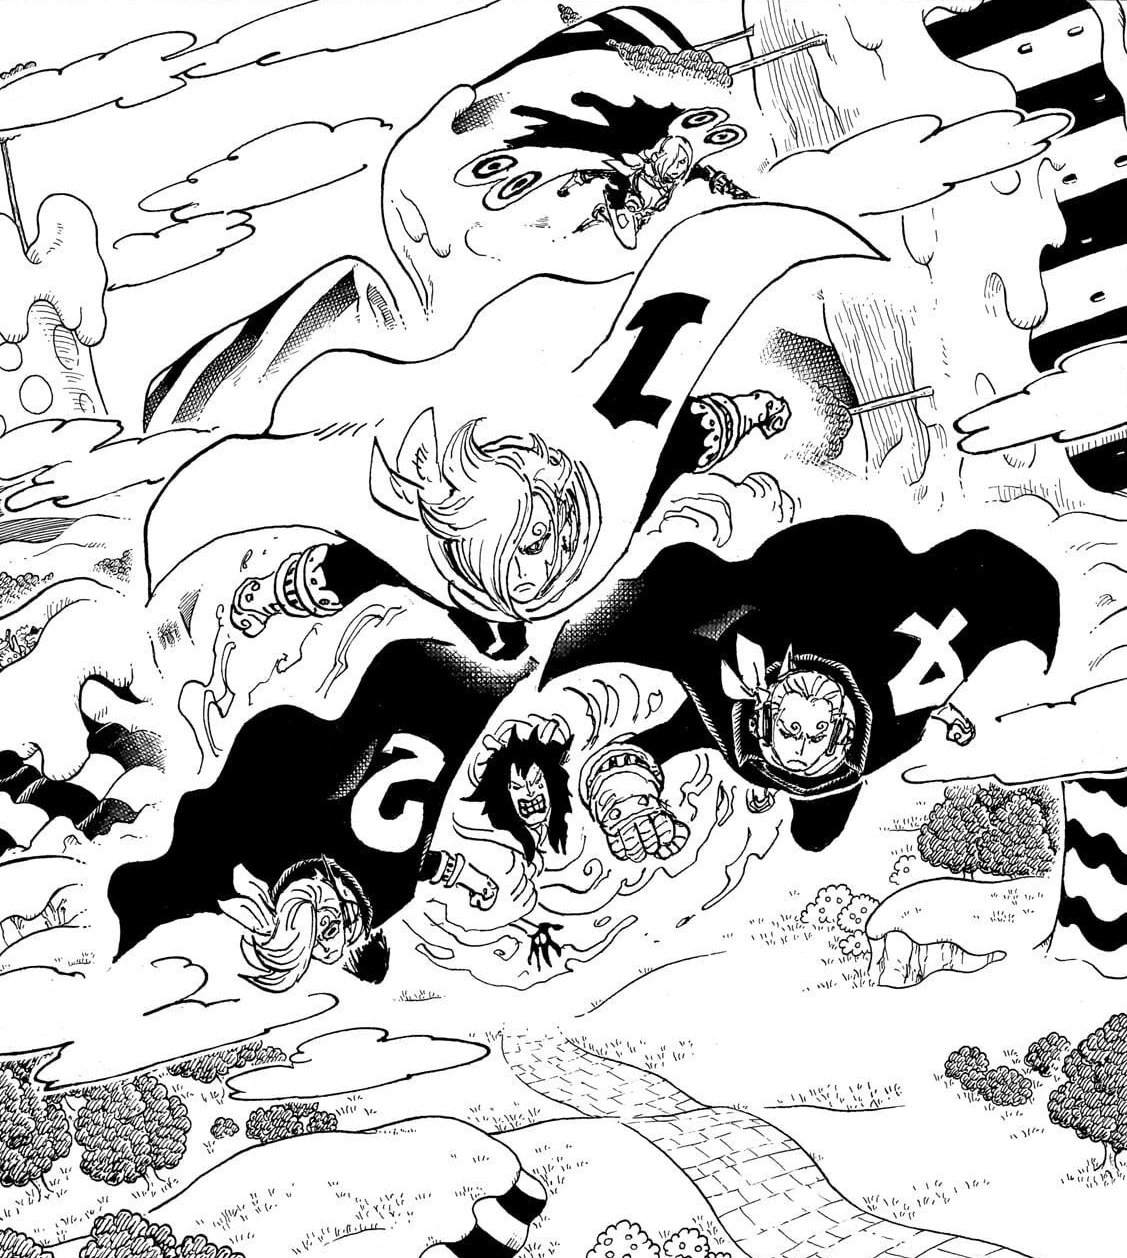 One Piece  Spoilers completos do mangá 1057 – Finale